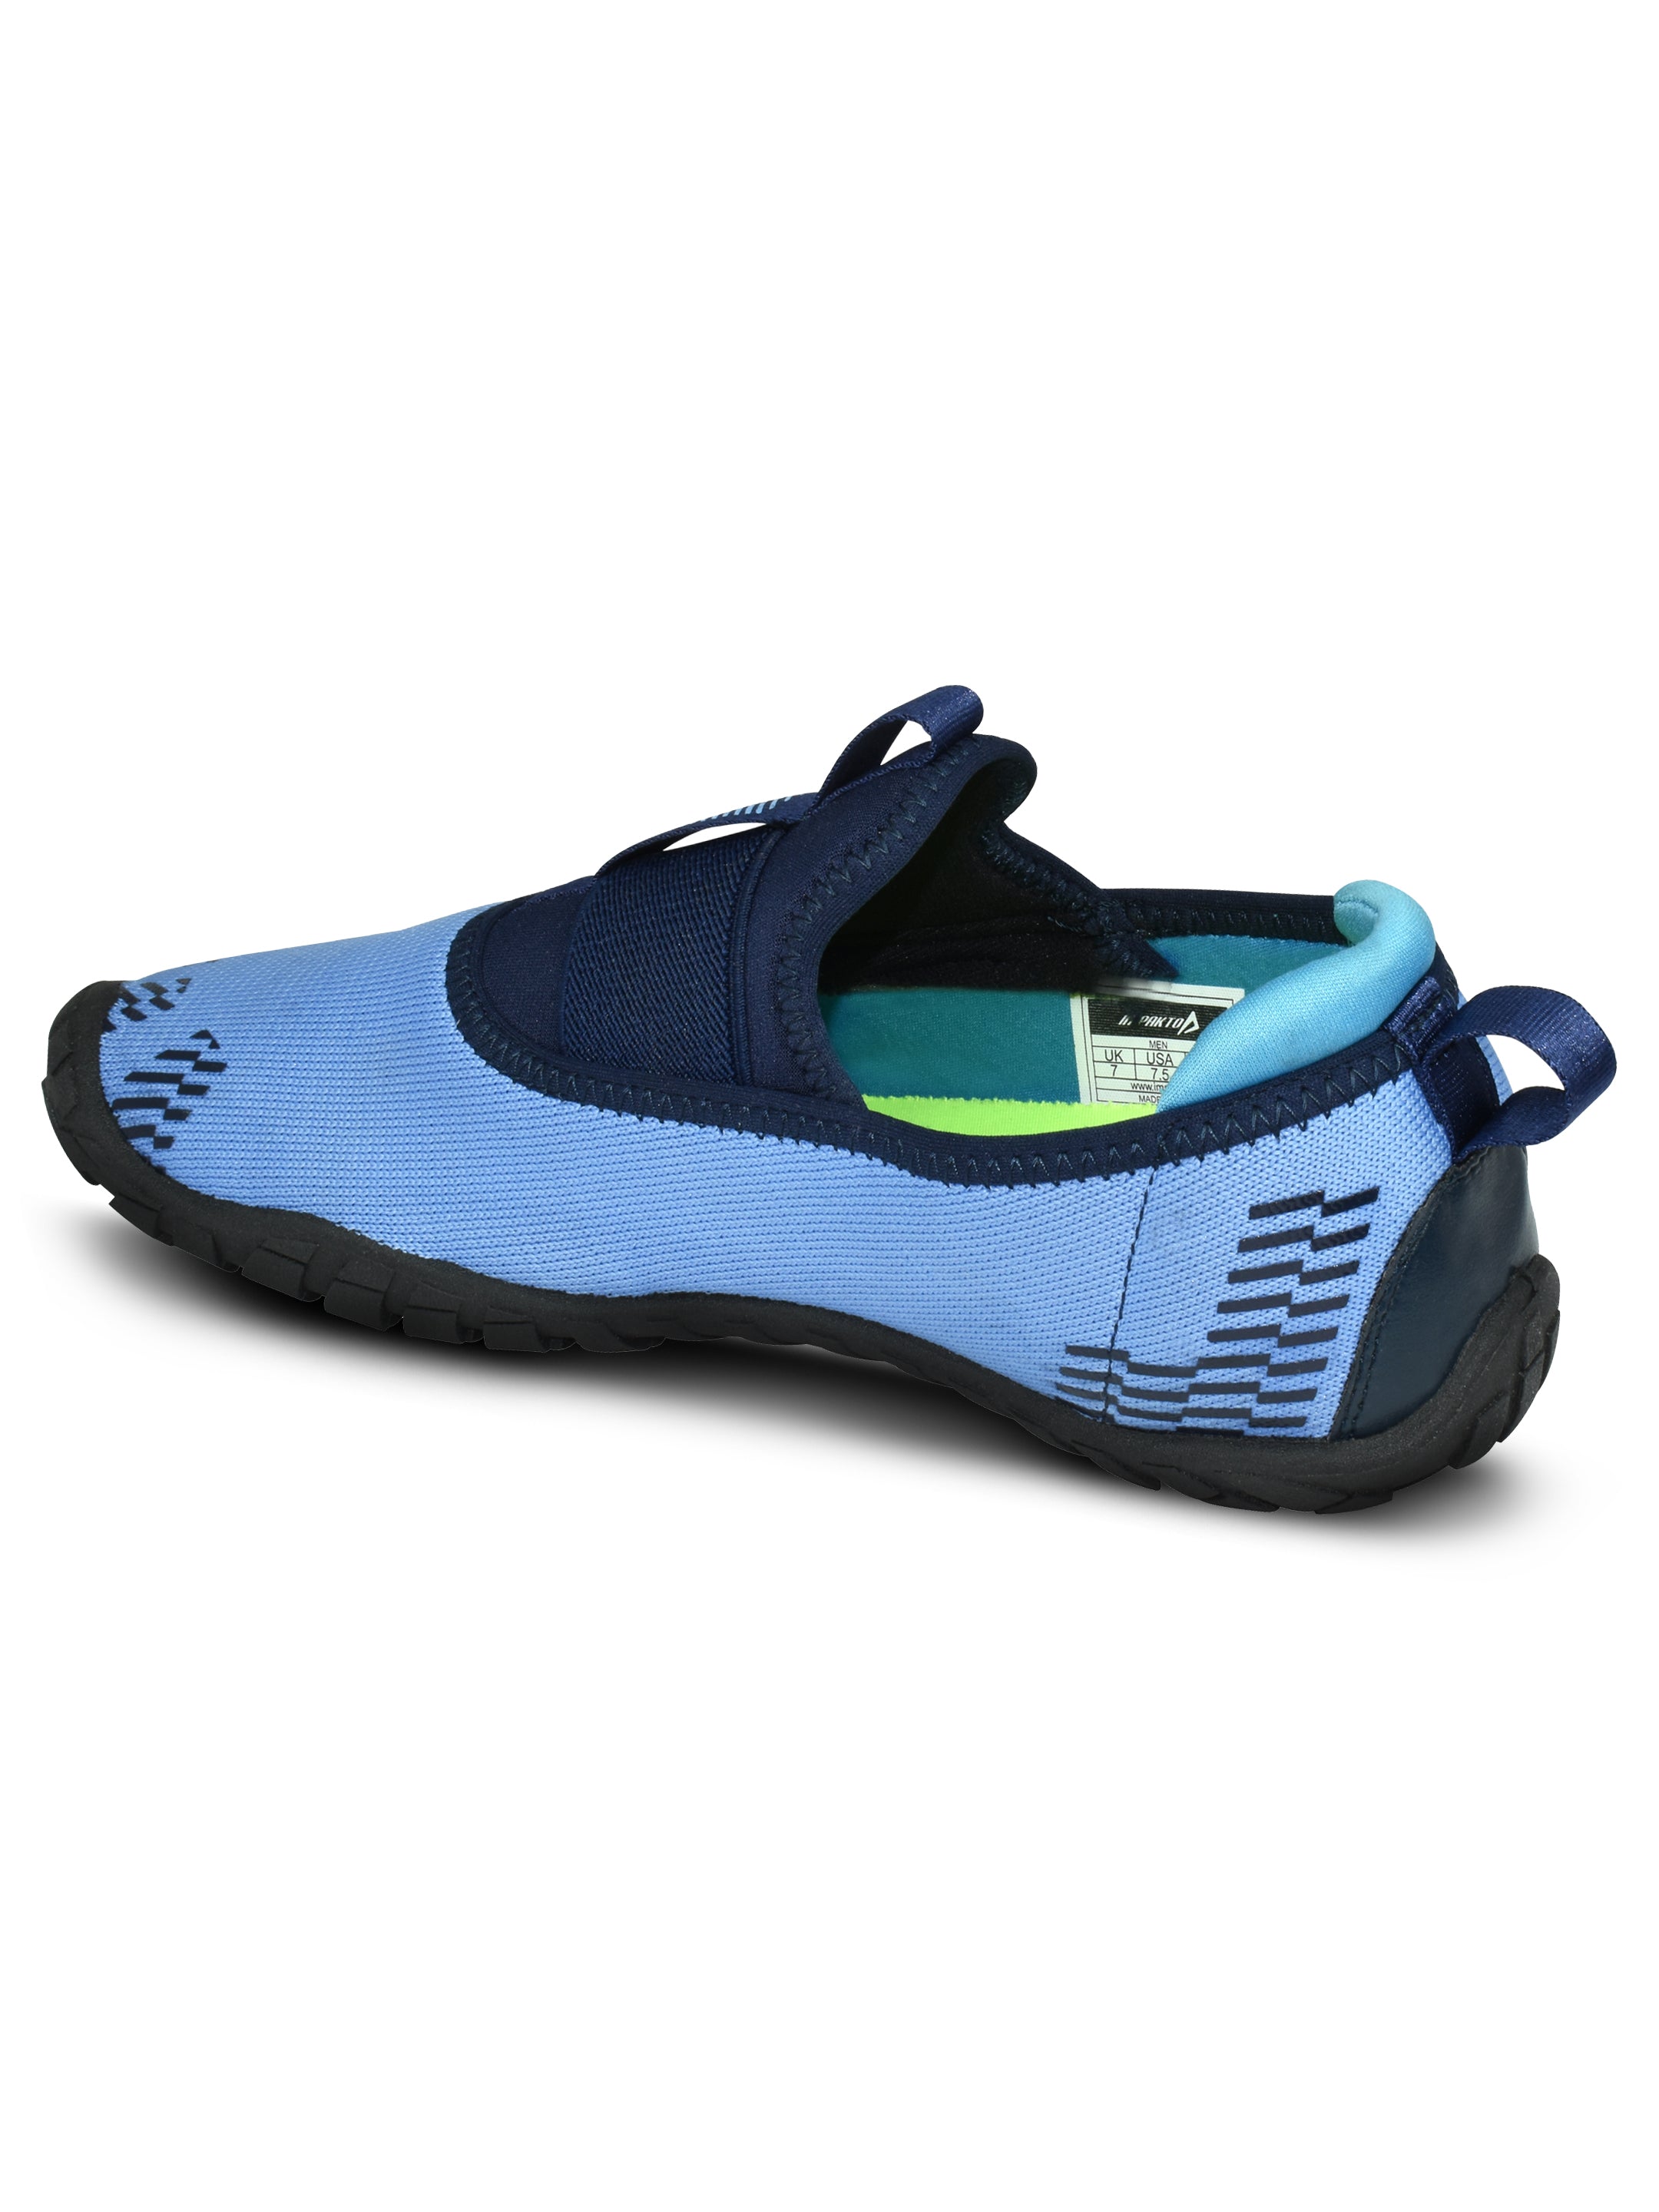 Impakto Barefoot Rooted Men's Teal Blue Gym Shoes